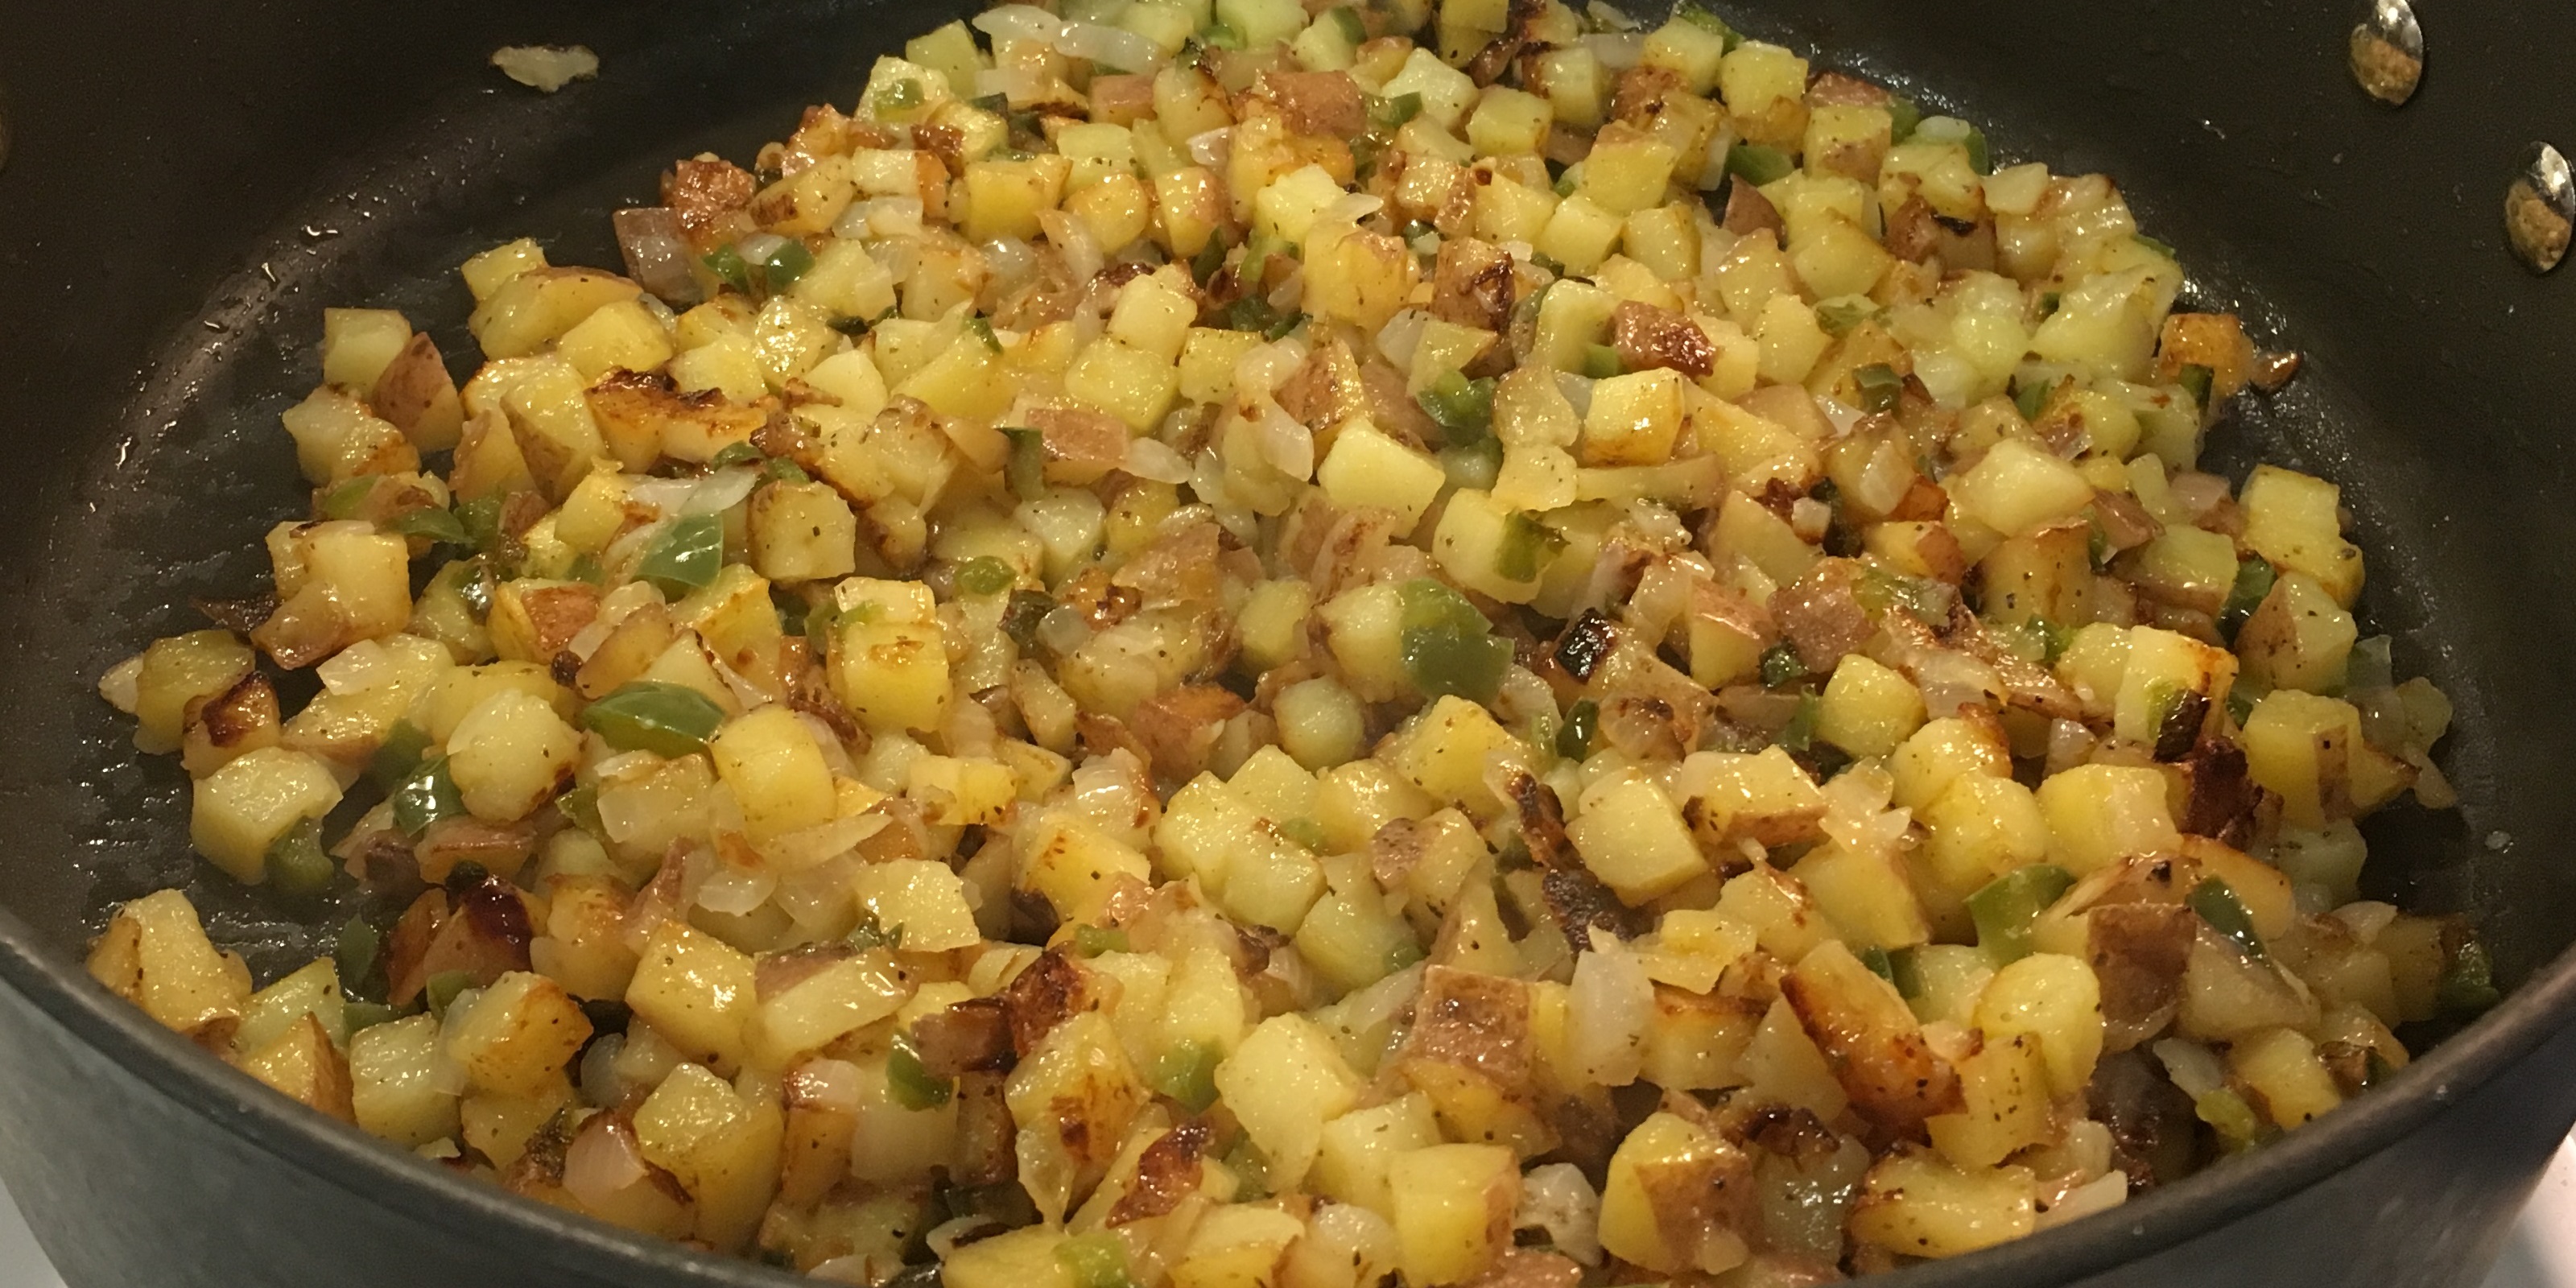 Home Fries